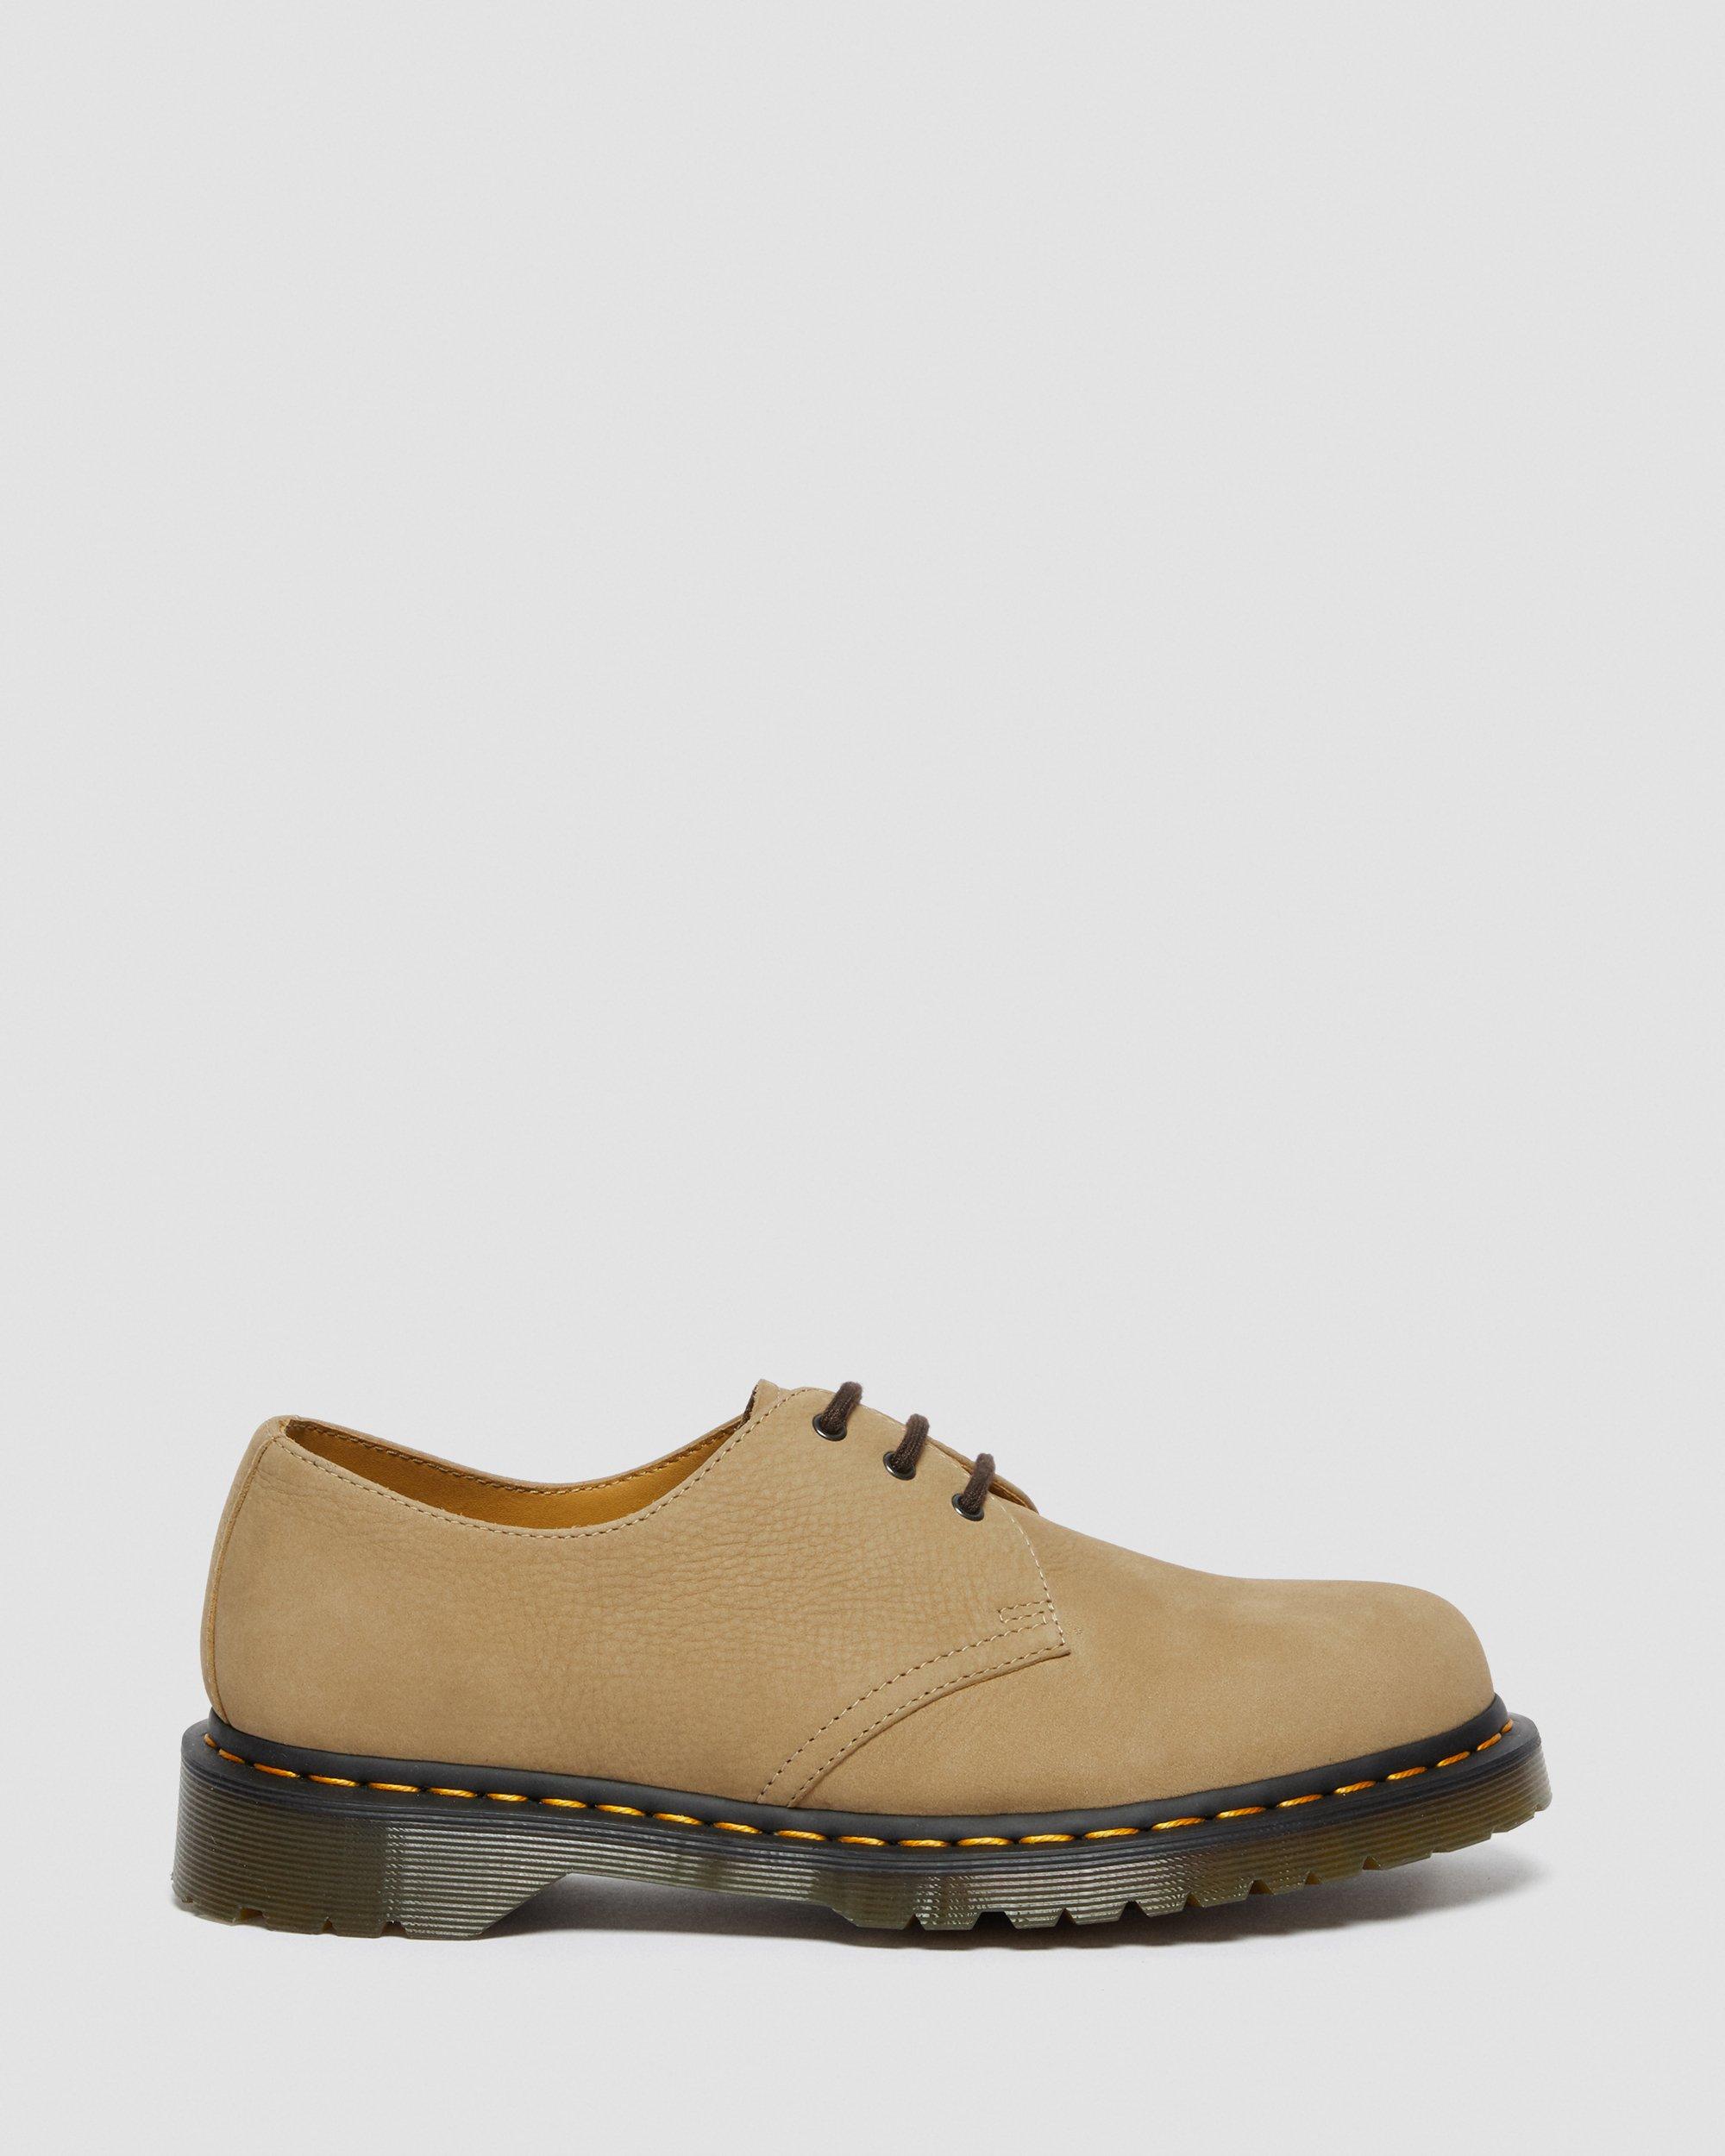 1461 Nubuck Leather Oxford Shoes | Dr. Martens